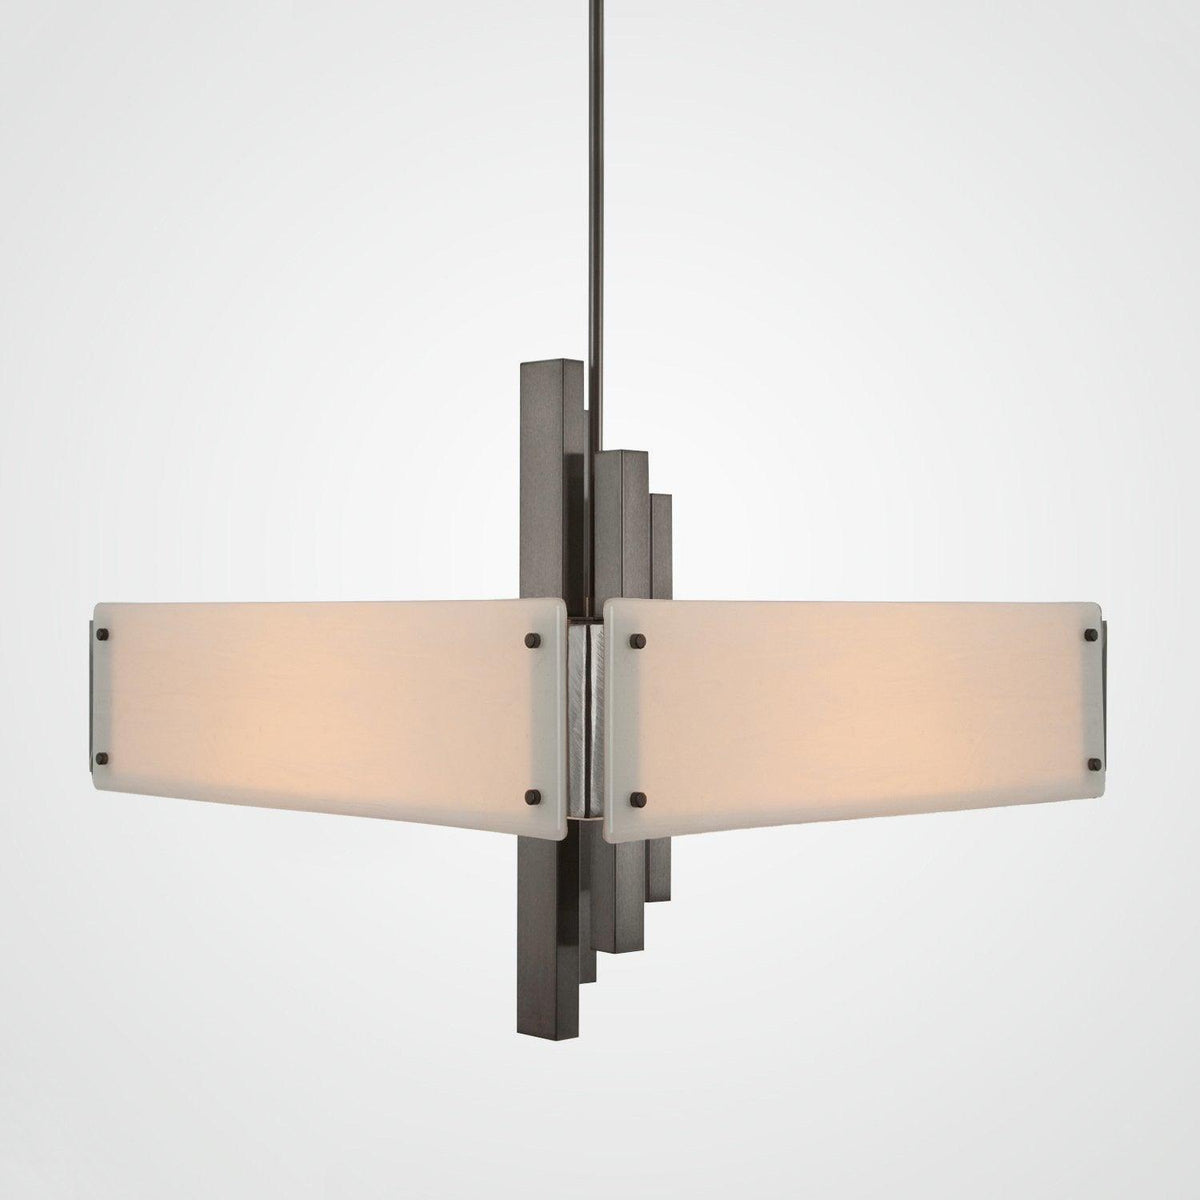 Hammerton Studio - Carlyle Square Chandelier, 24-Inch - CHB0033-0A-SN-IW-001-E2 | Montreal Lighting & Hardware